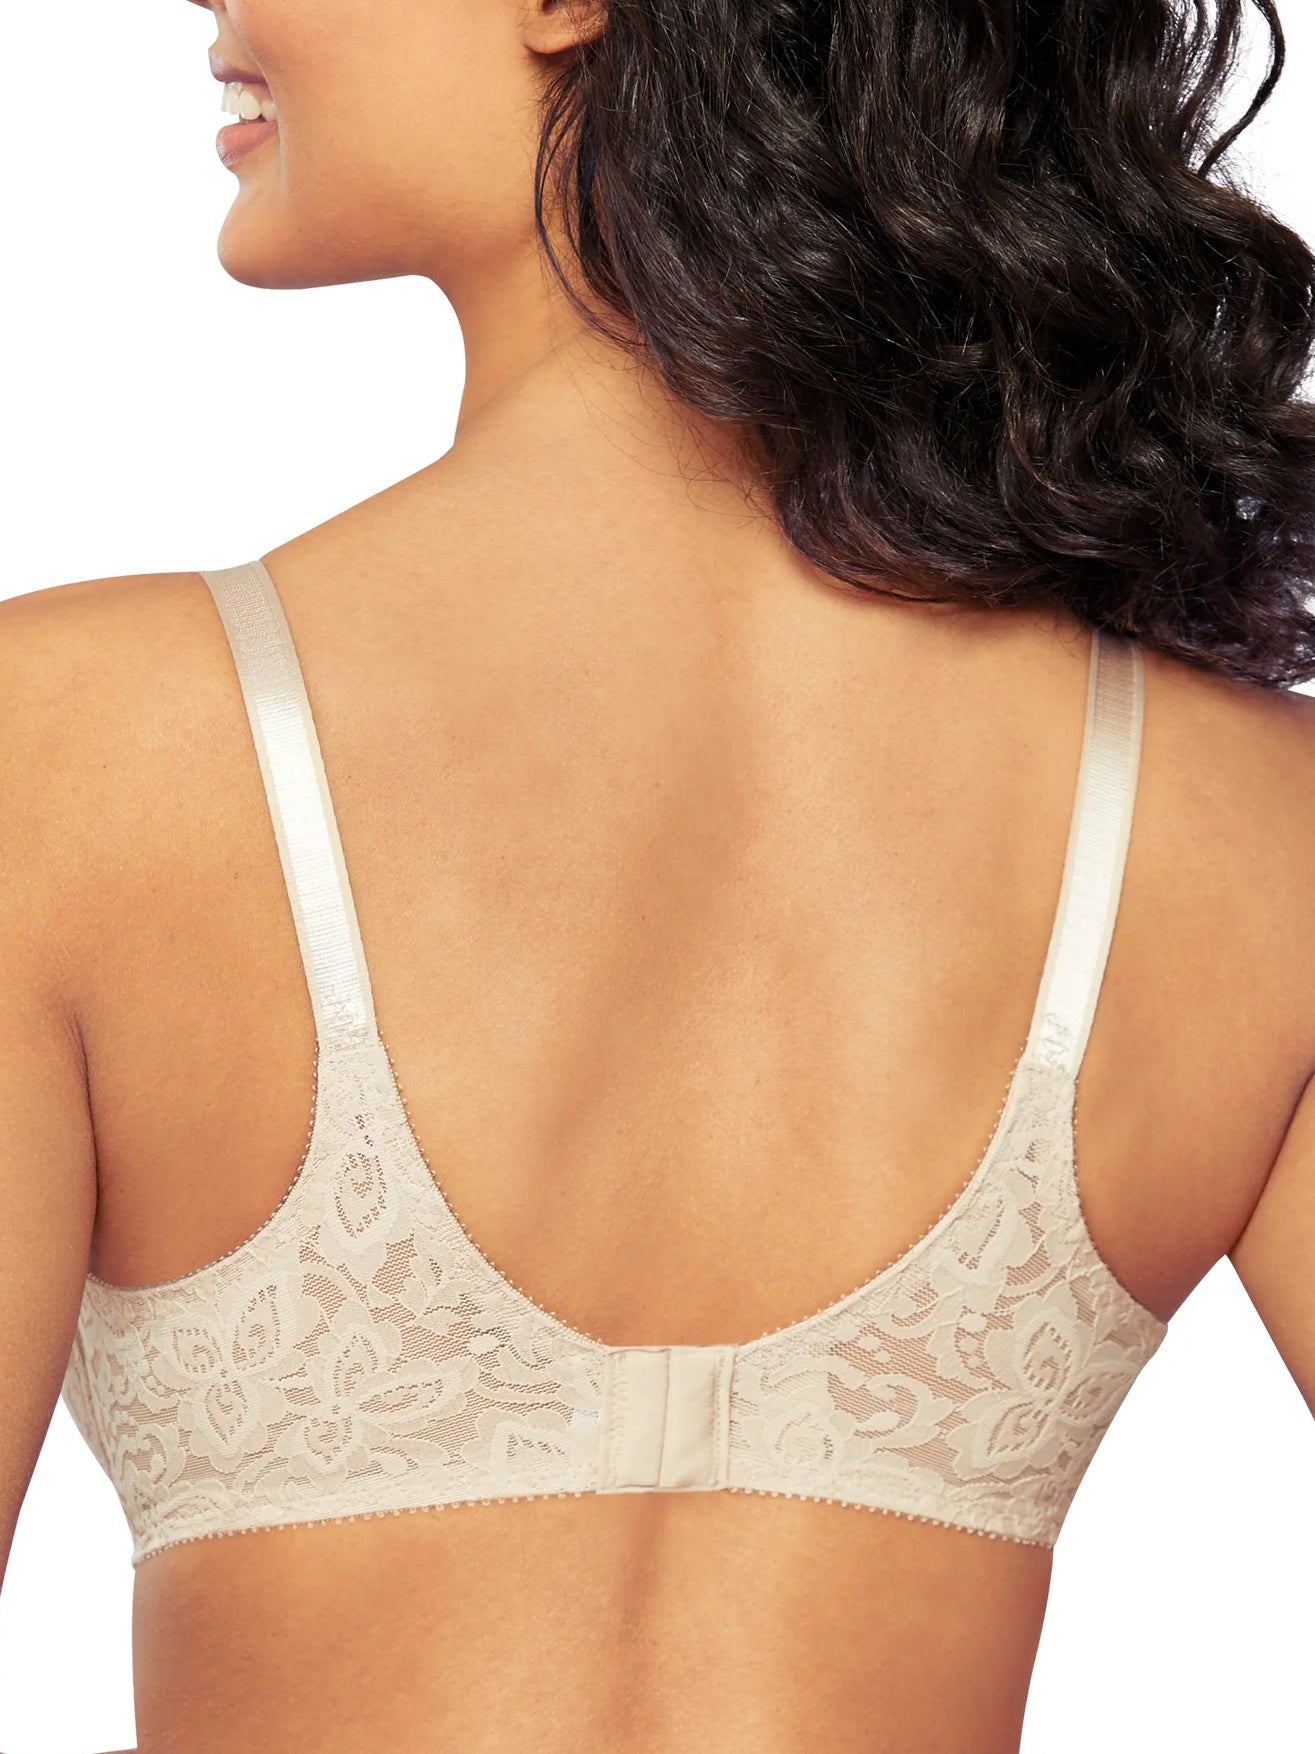 Bali Lace 'N Smooth Underwire Bra, Lace Bra with Stay-in-Place